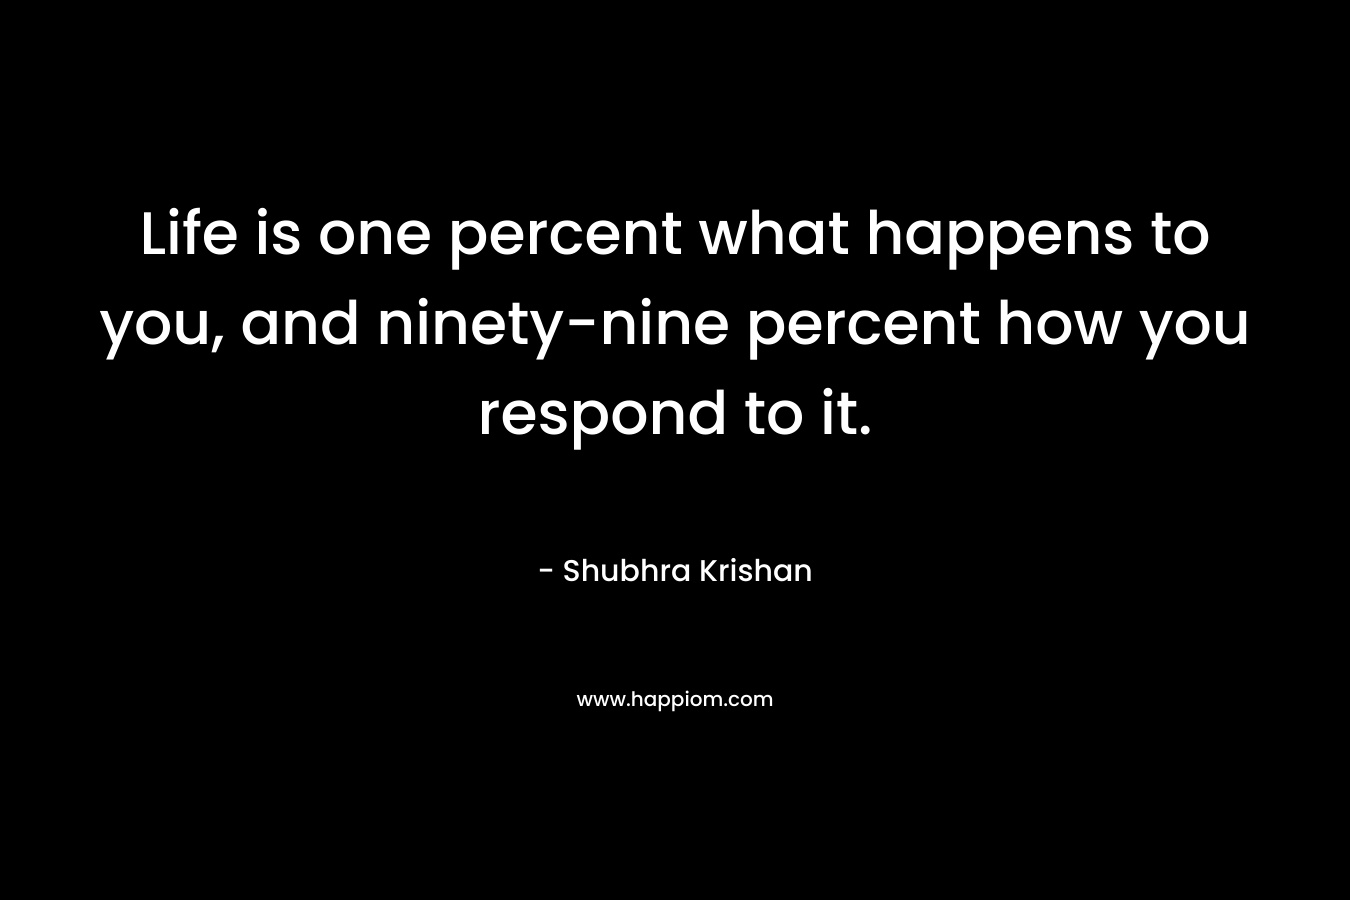 Life is one percent what happens to you, and ninety-nine percent how you respond to it. – Shubhra Krishan